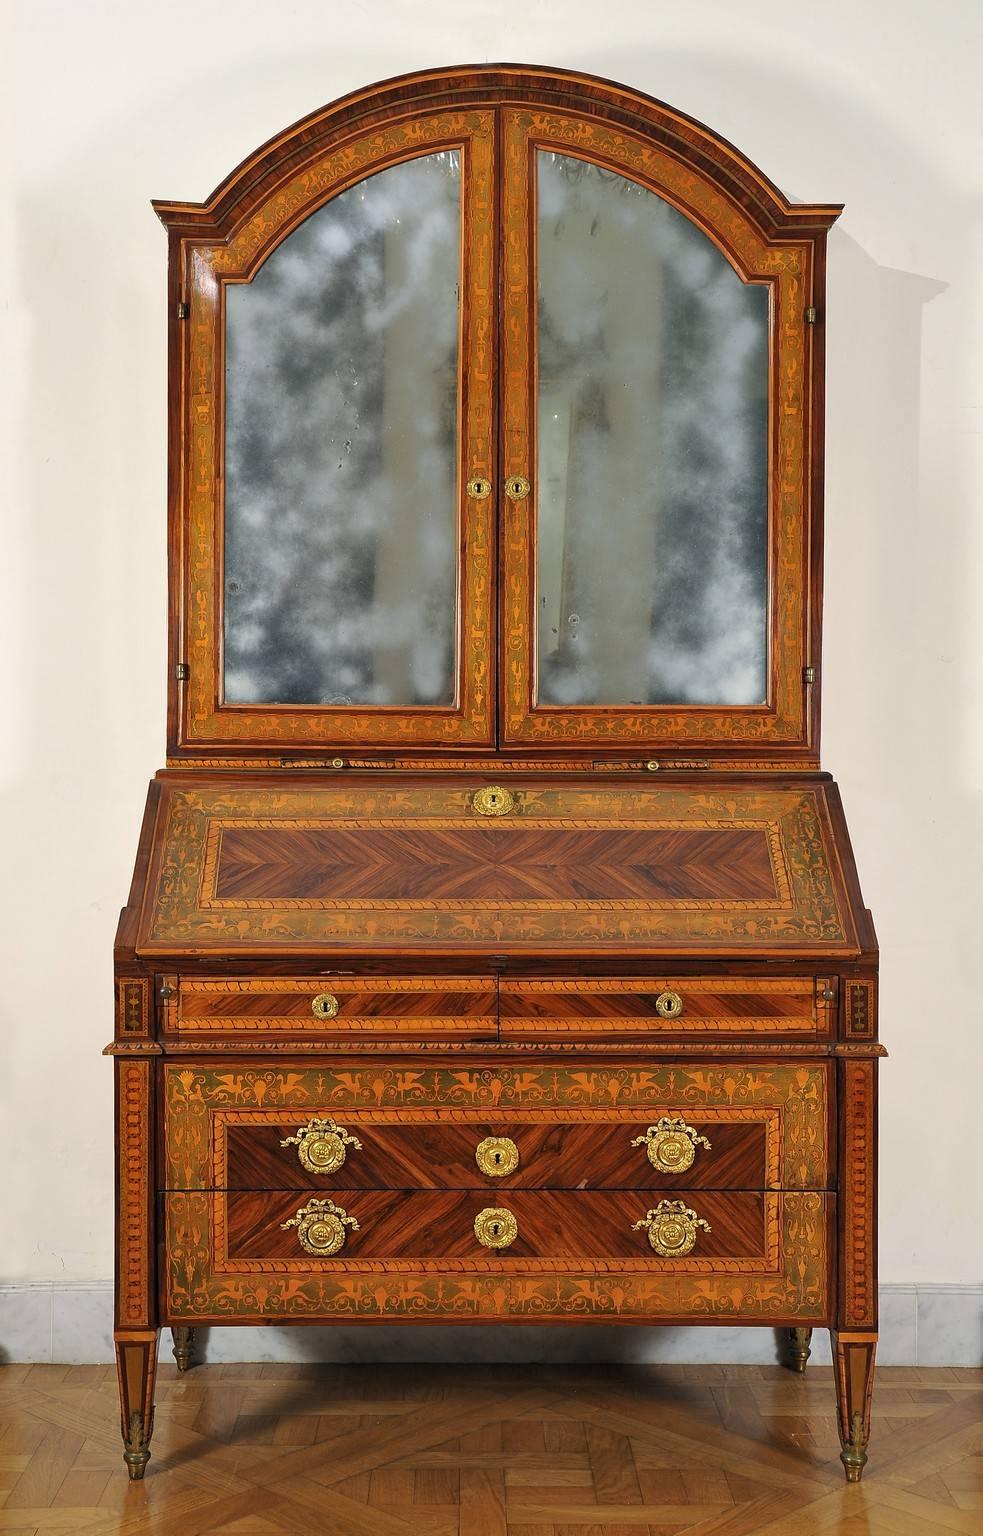 This couple of furniture is made of Louis XVI commode and trumeau. The first one is a commode with two drawers plus one, top drawer can be opened as a desk and is concealing six drawers and a flap with a mirror. Veneer in purple wood richly inlaid